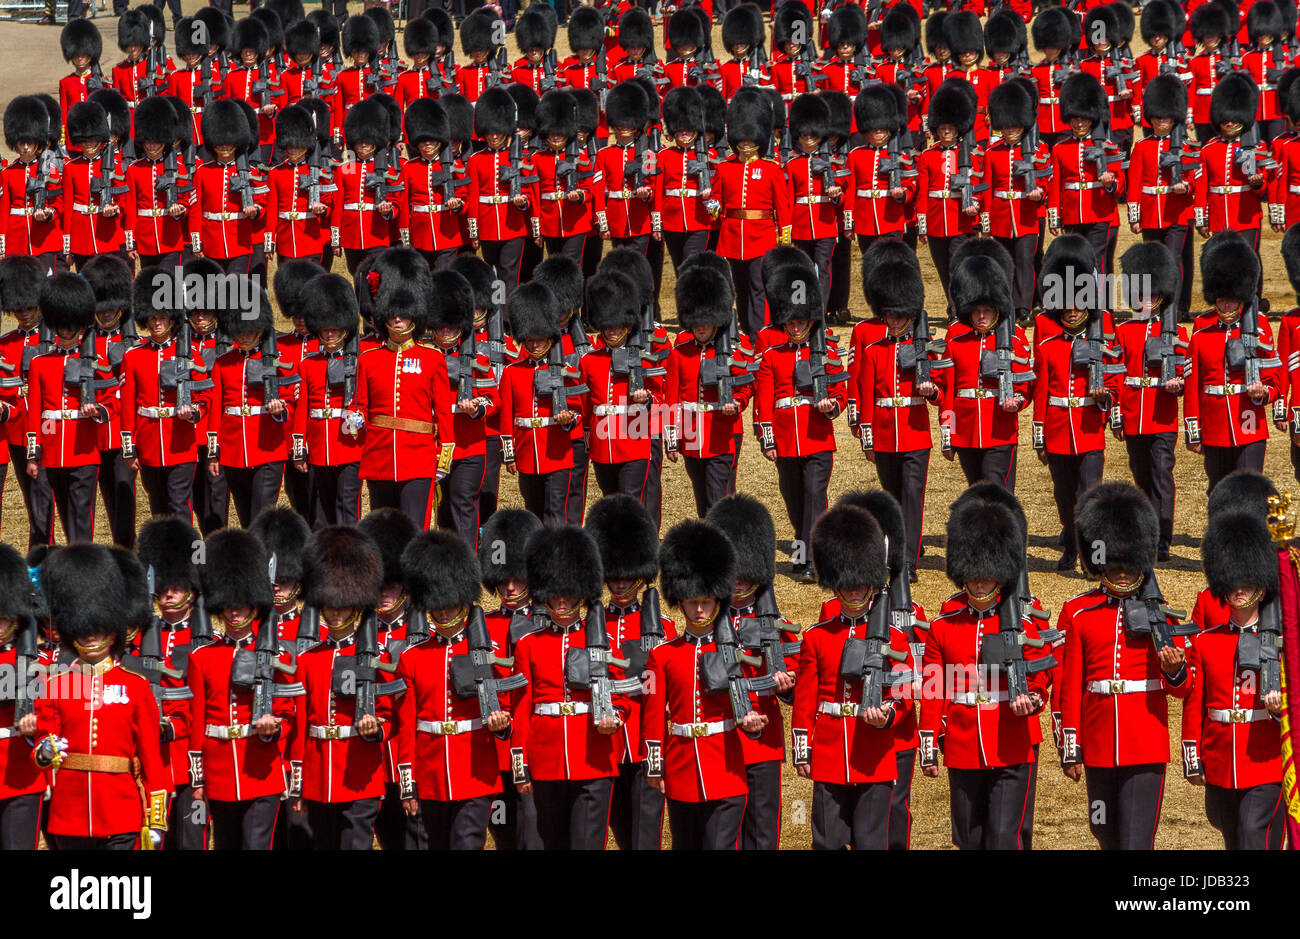 Soldiers of The Irish Guards marching at Trooping The Colour or Queens Birthday Parade at Horse Guards Parade, London, UK, 2017 Stock Photo